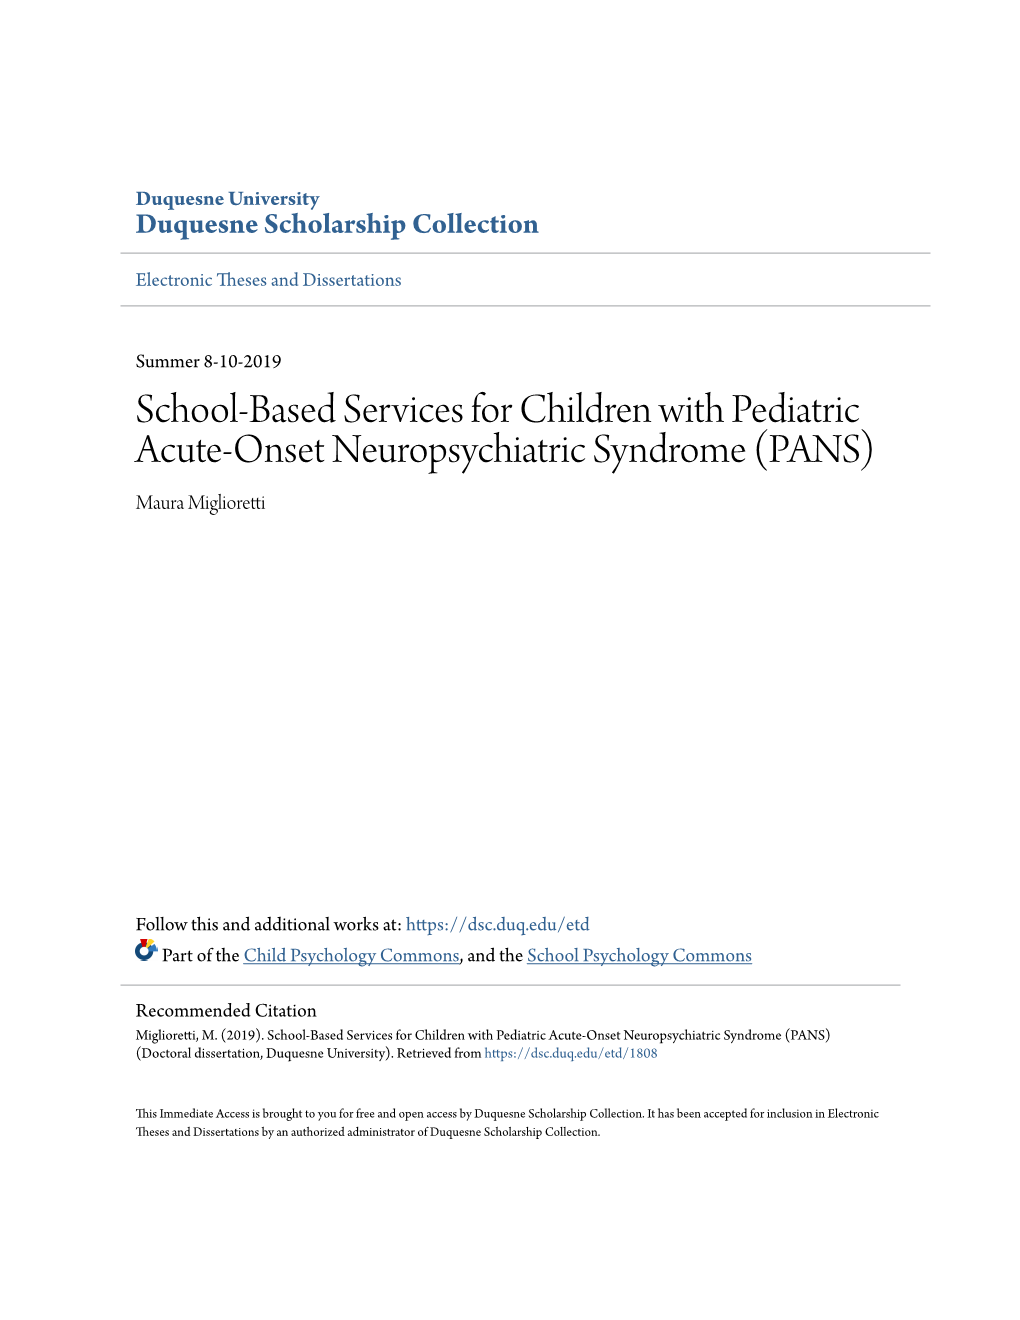 School-Based Services for Children with Pediatric Acute-Onset Neuropsychiatric Syndrome (PANS) Maura Miglioretti